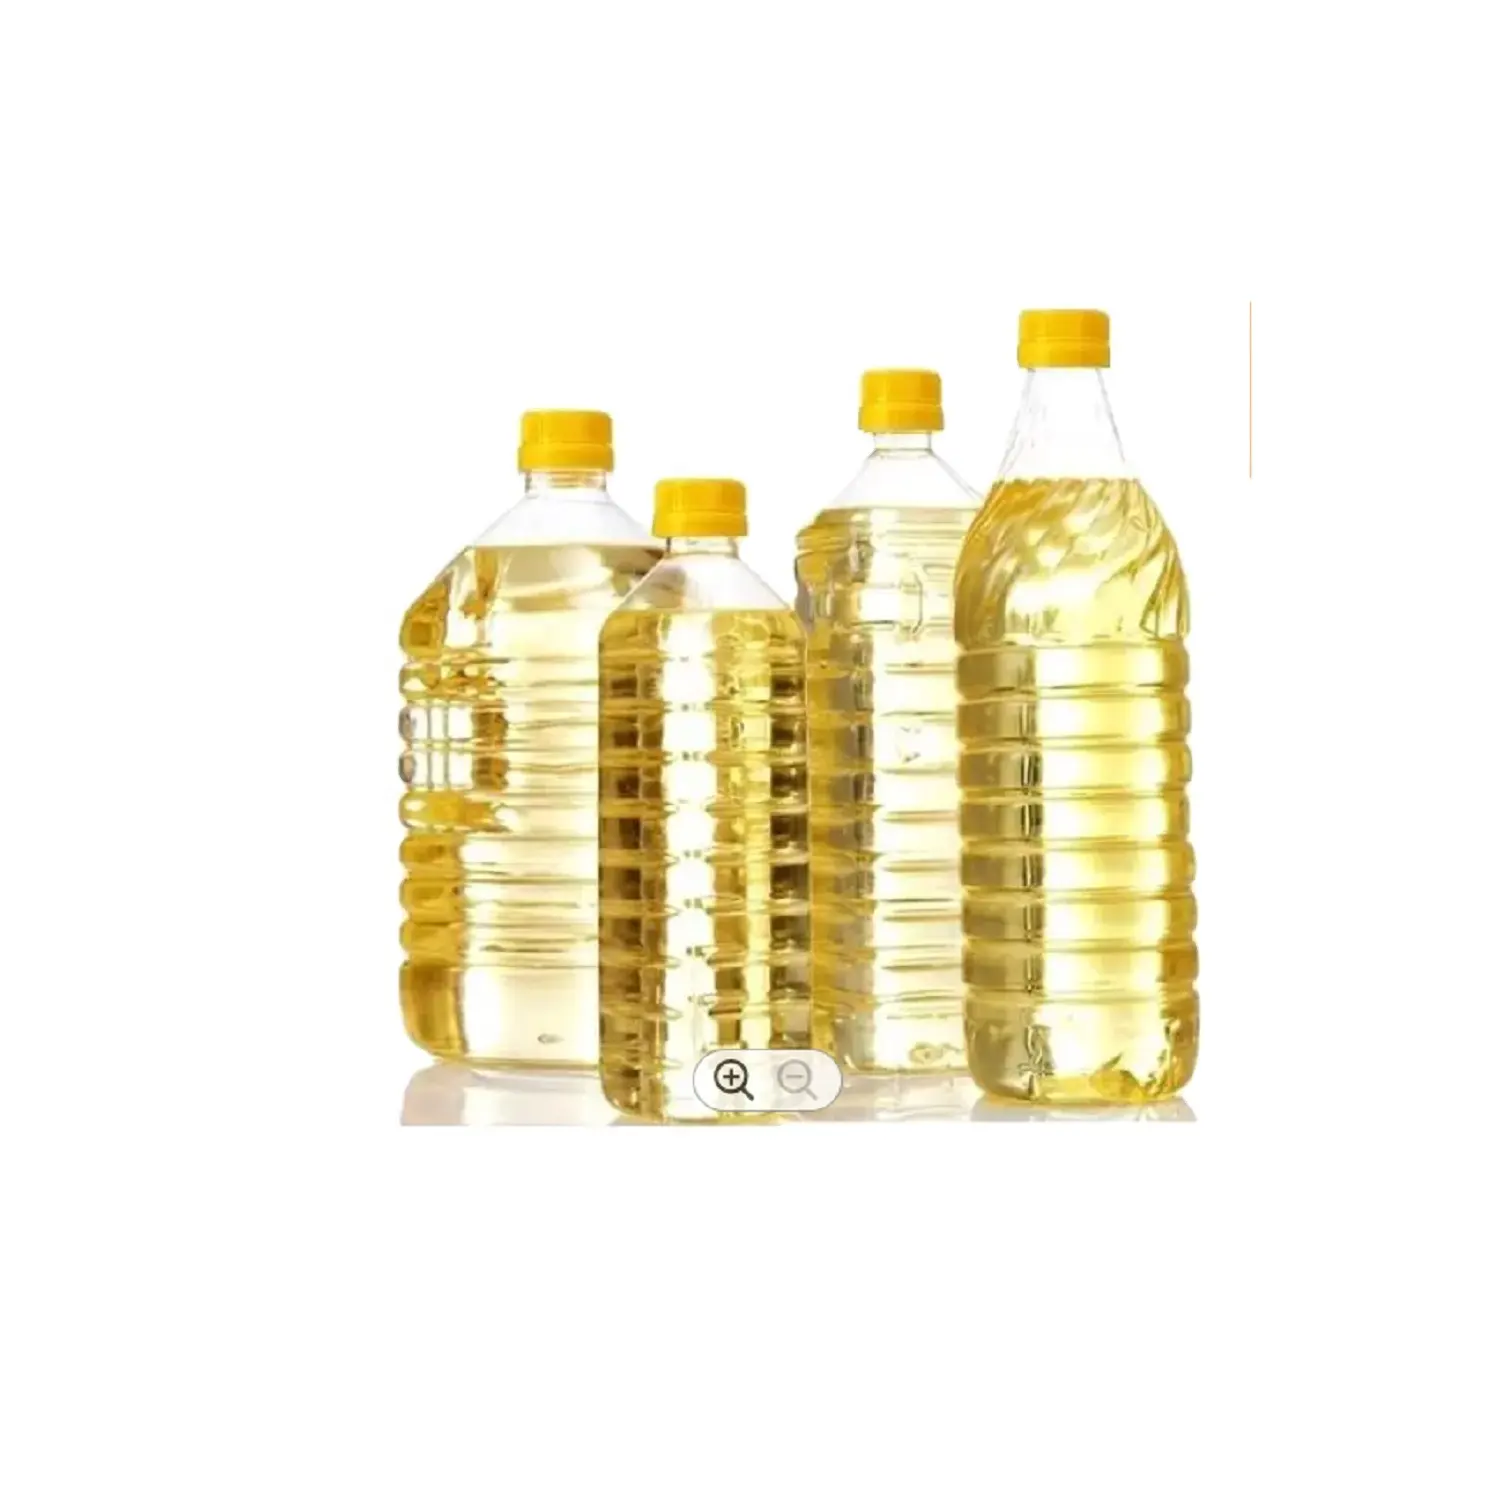 100% Organic Refined Sunflower Oil food grade 20l pack 25tons 15days high quality export pure refined edible sunflower oil